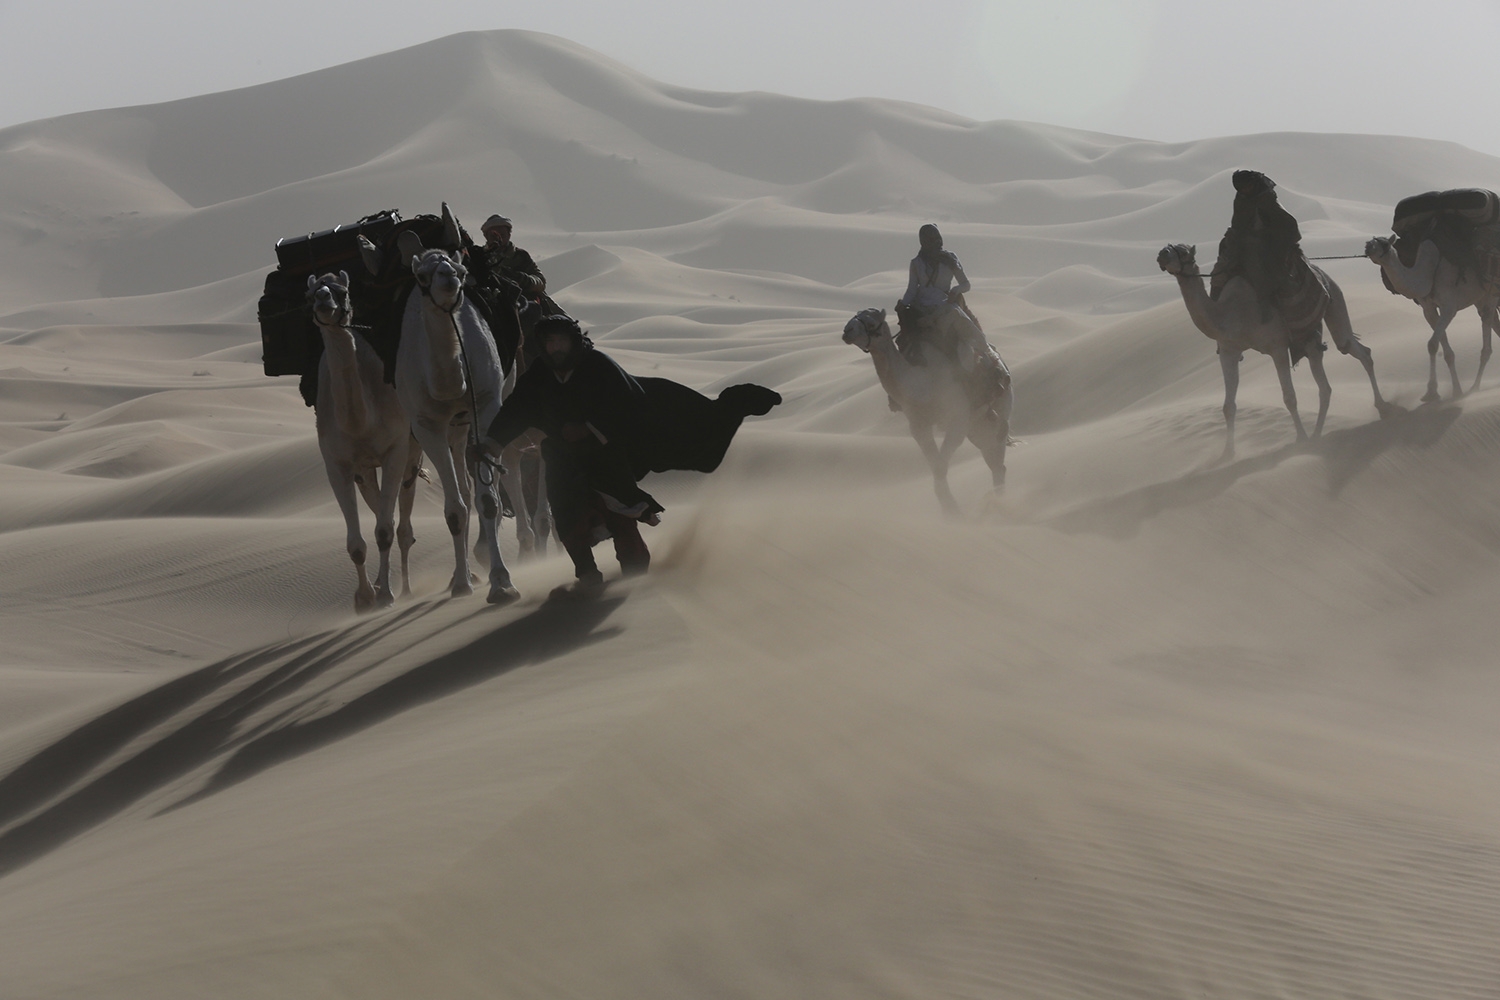 A group of people riding camels during a sandstrum between dunes in the desert.